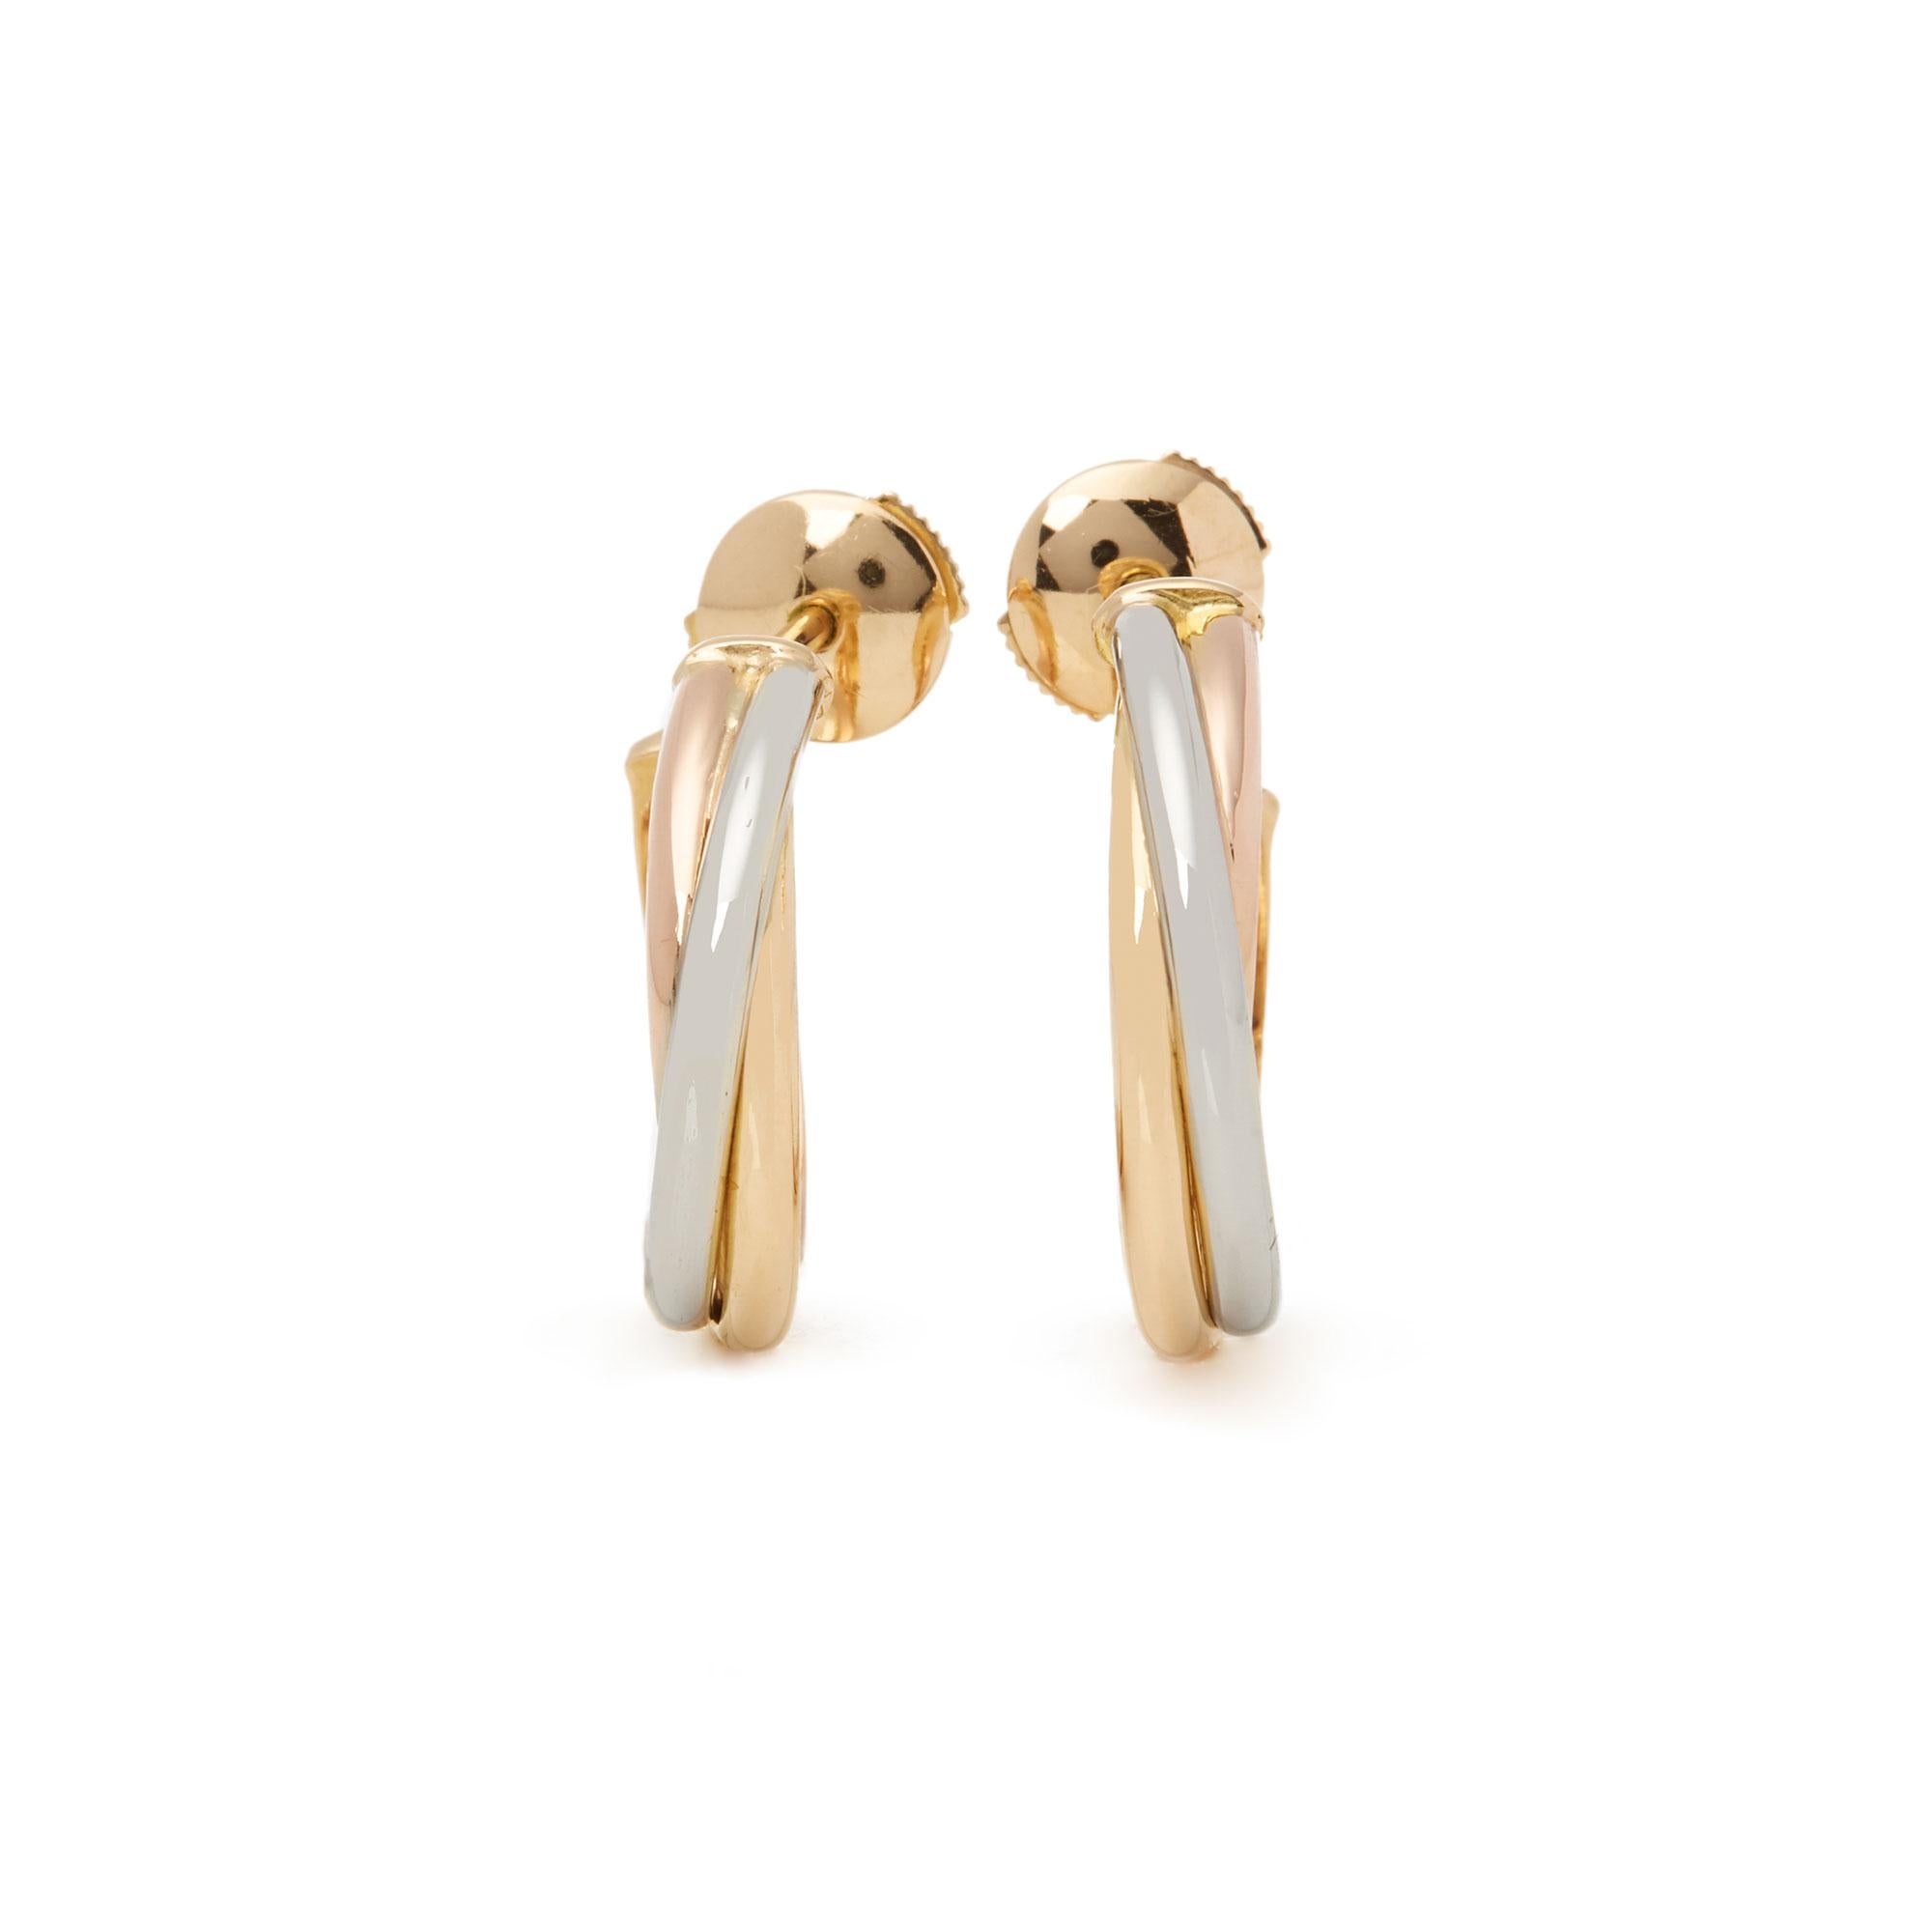 These earrings by Cartier are from their Trinity Collection and feature a twisted design in tri colour 18ct gold with a post and push back fitting. Complete with Cartier box. Our Xupes reference is COMJ475 should you need to quote this.